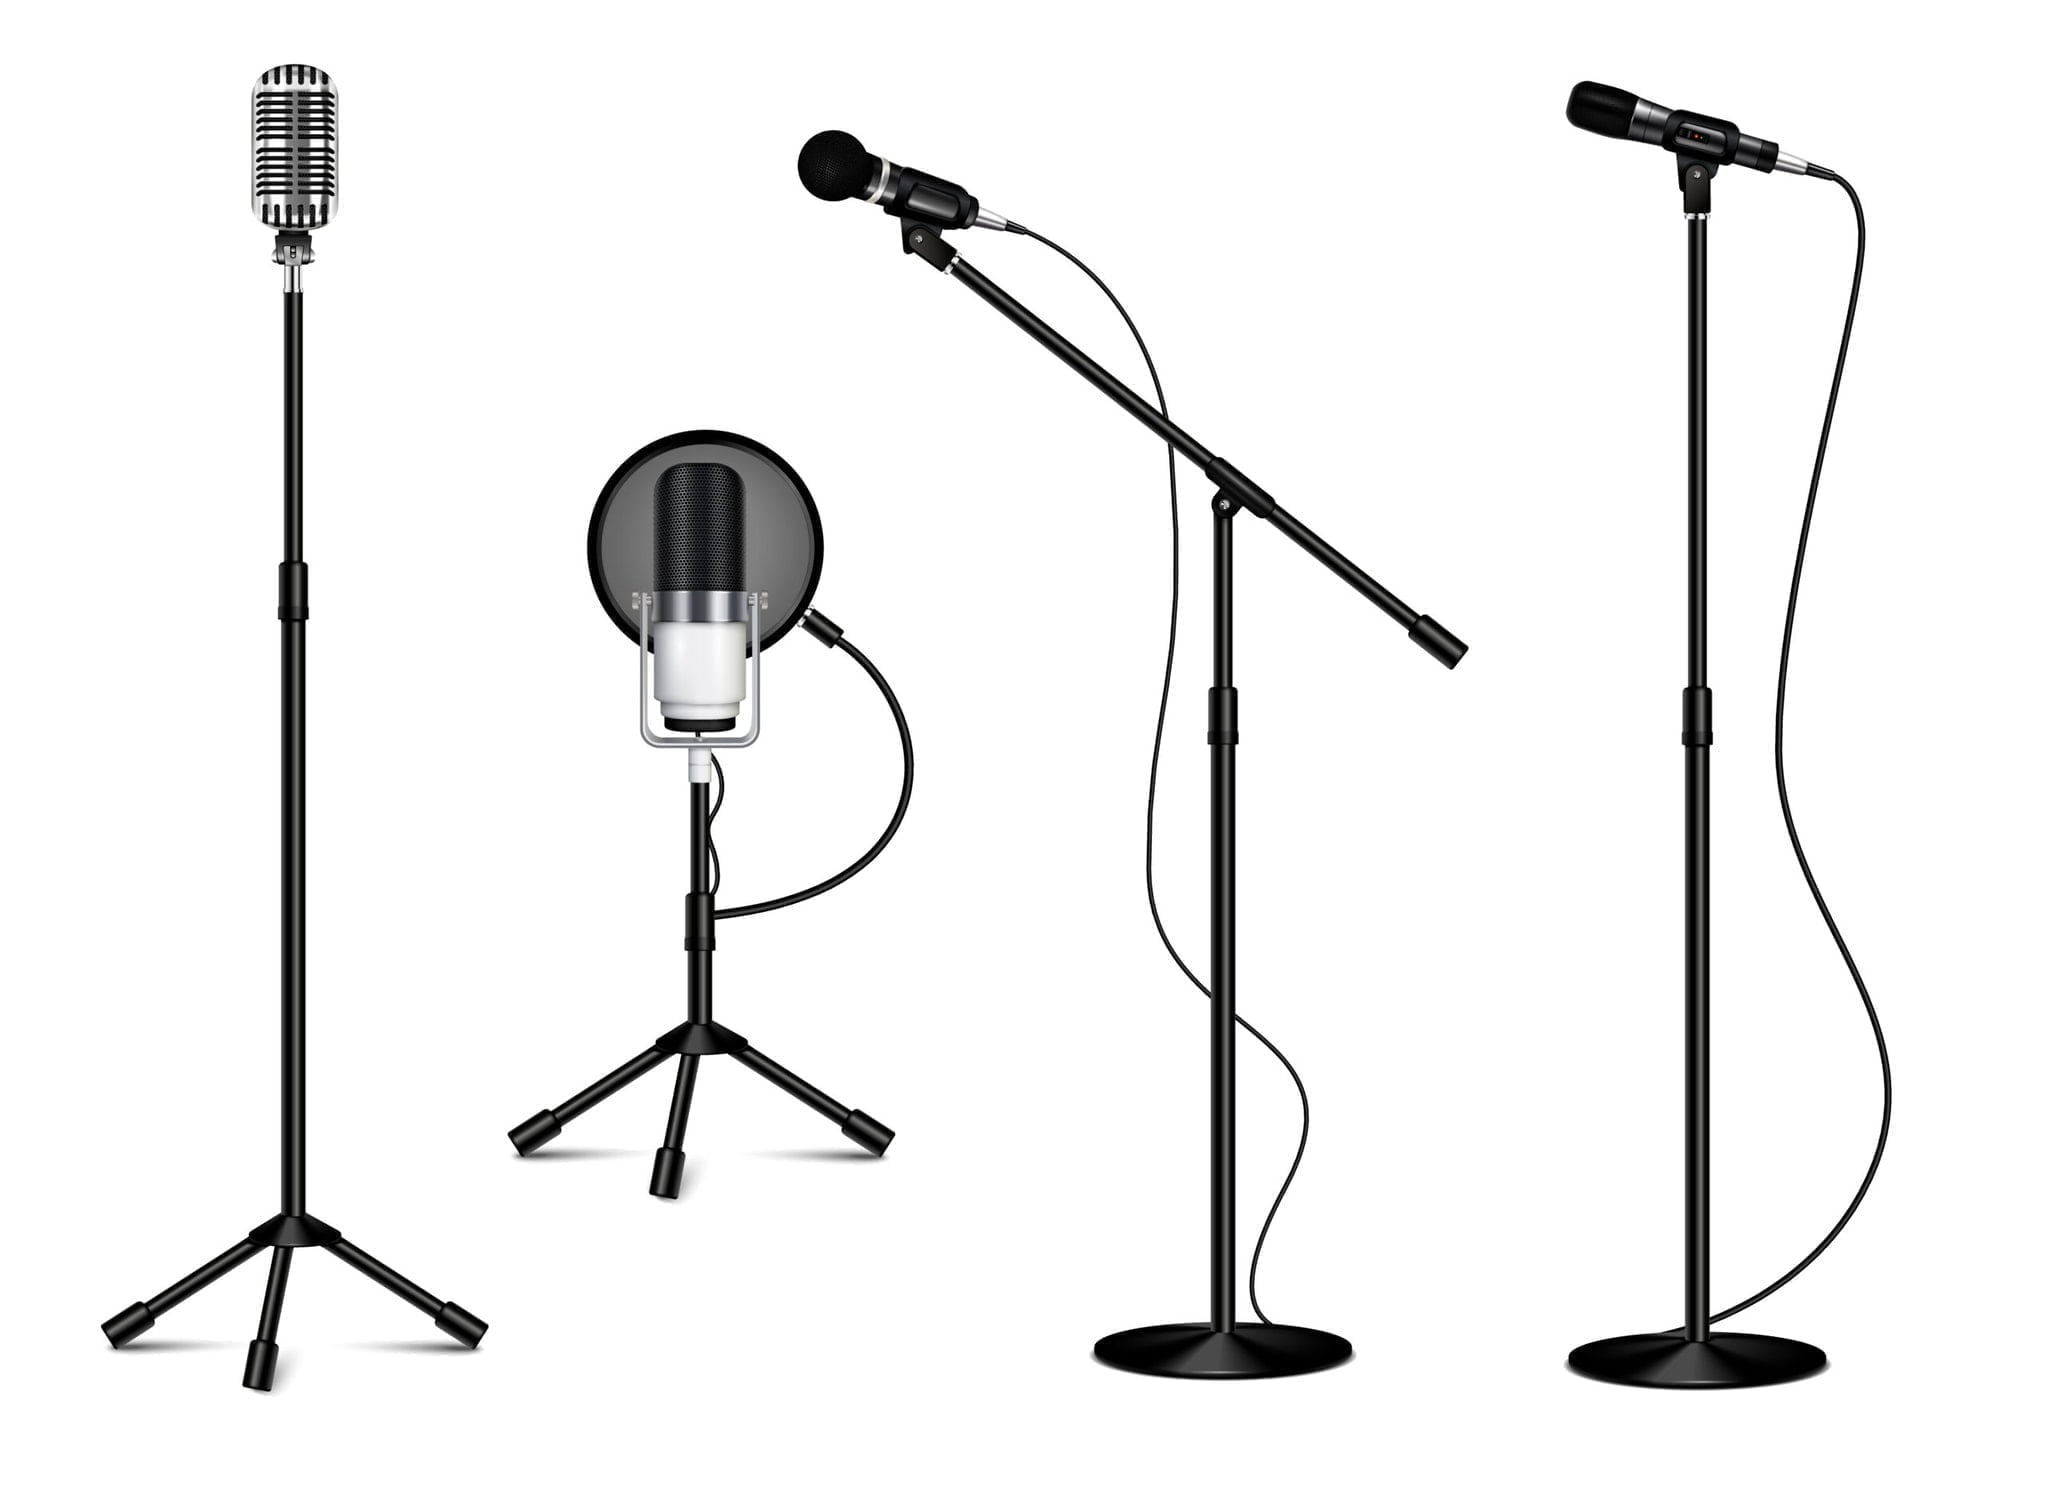 Microphone Stand pik scaled